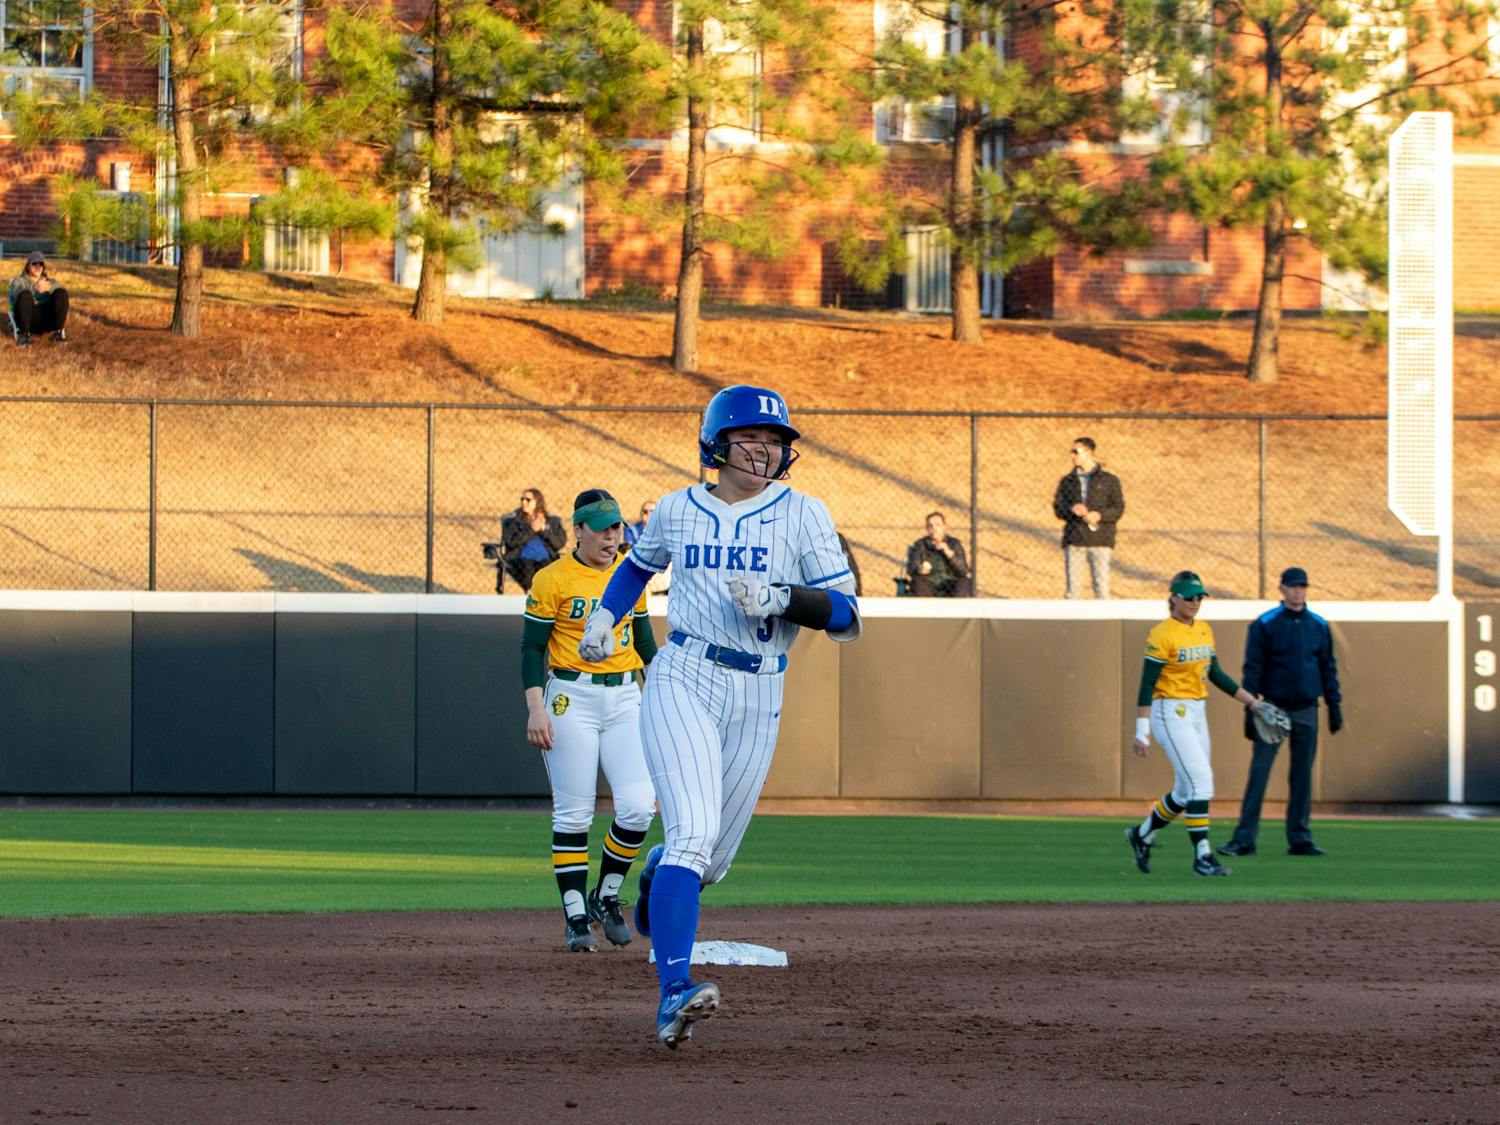 Kelly Torres' single clinched the win for the Blue Devils.